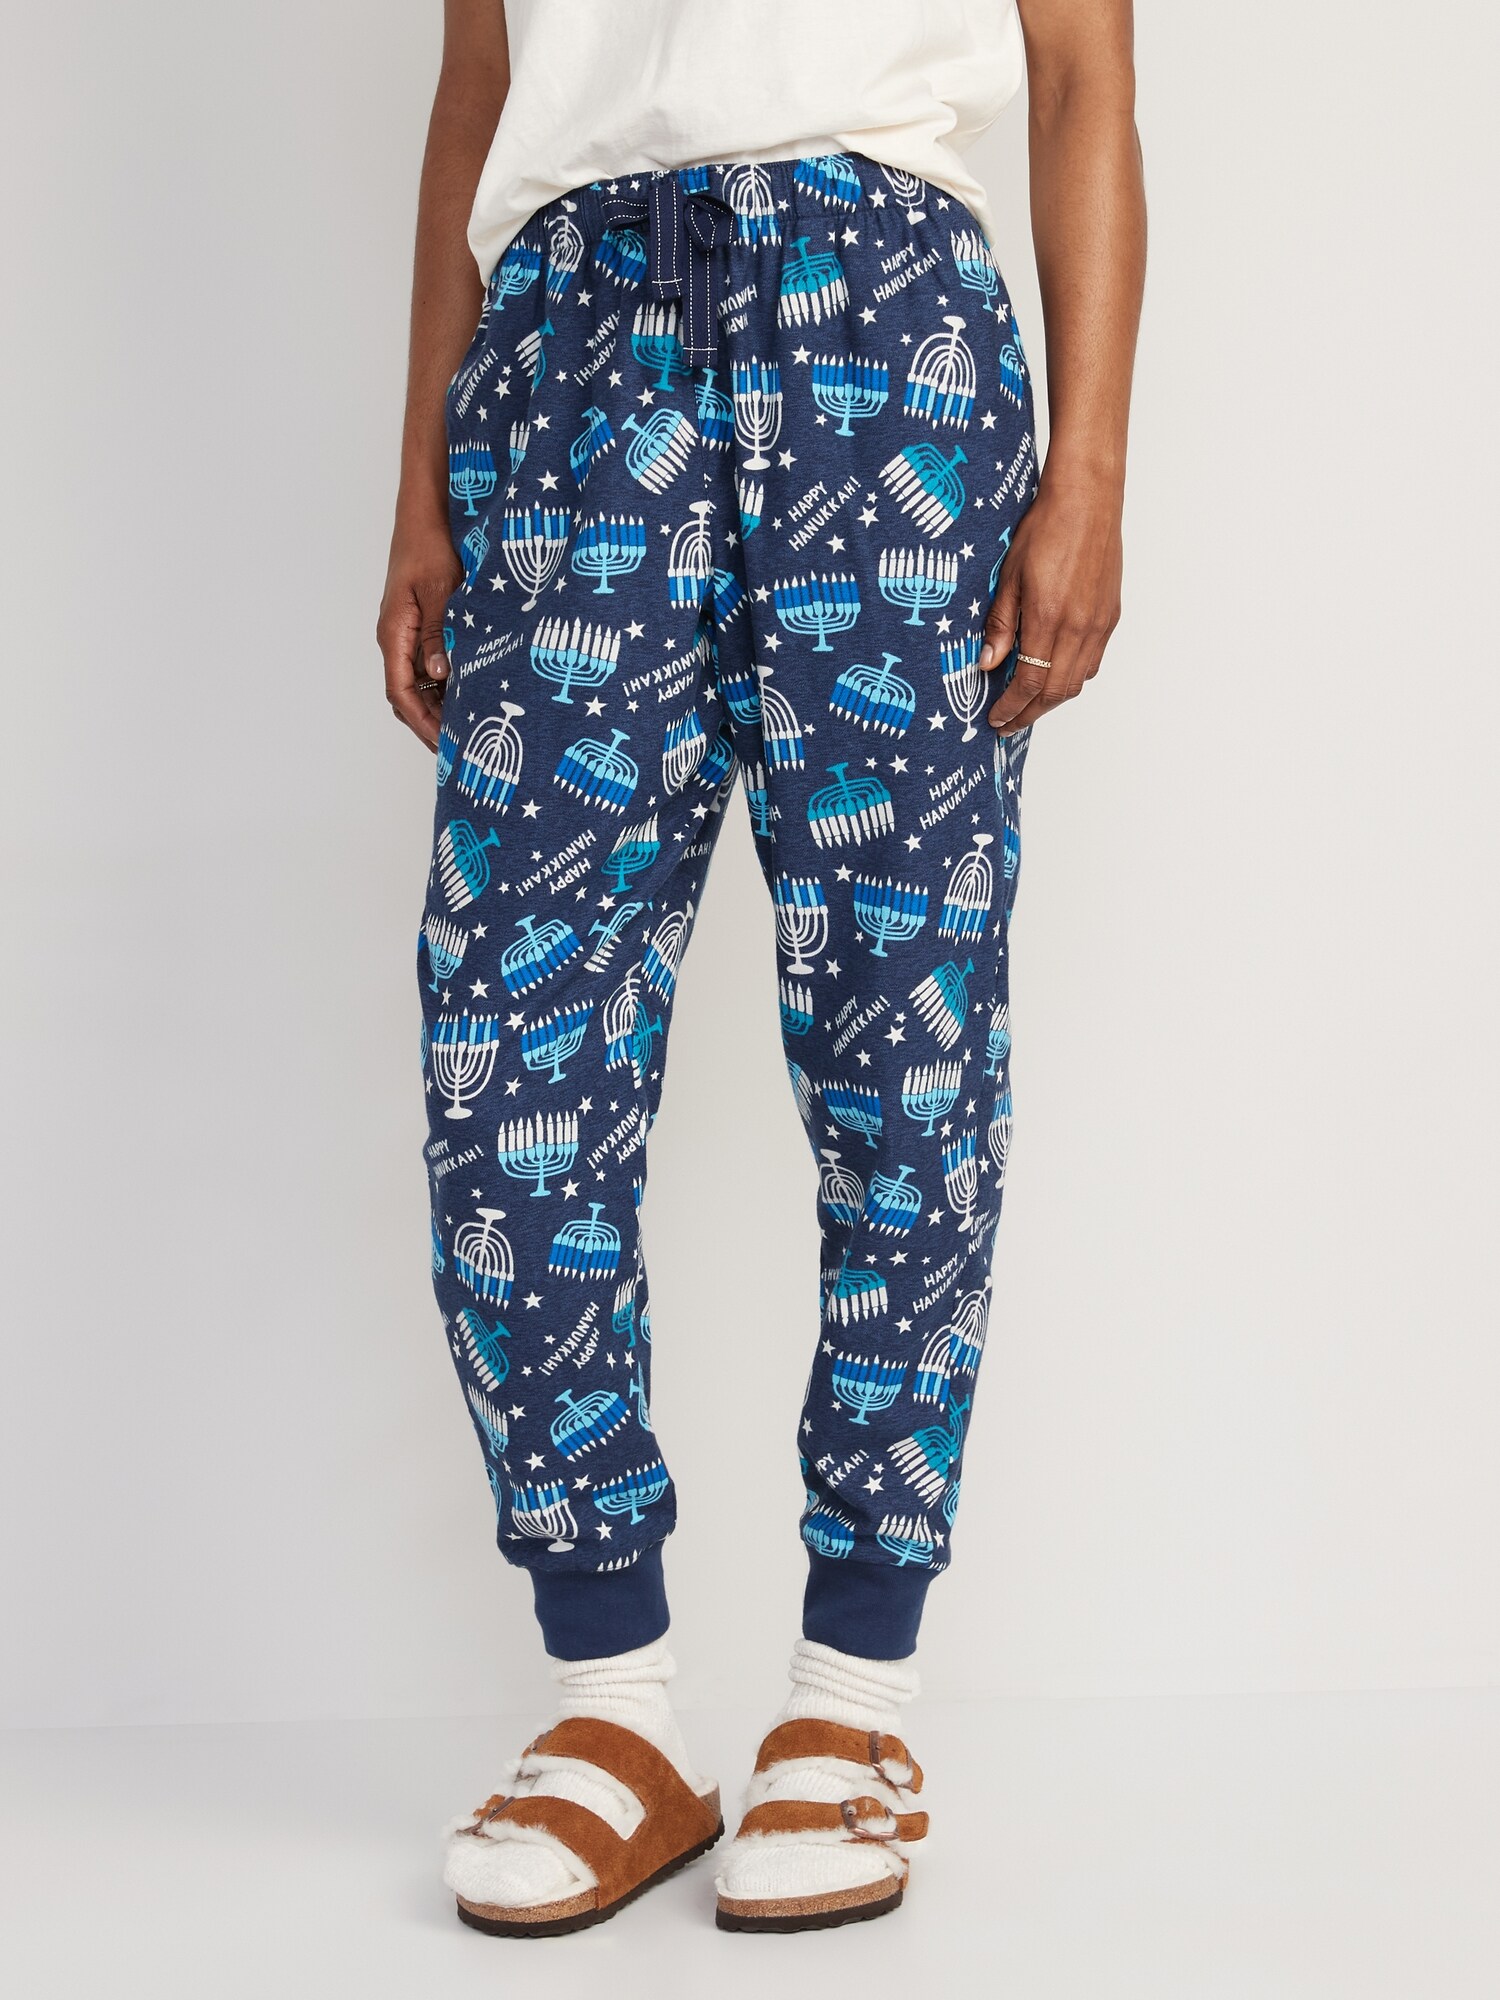 Oldnavy Printed Flannel Jogger Pajama Pants for Women